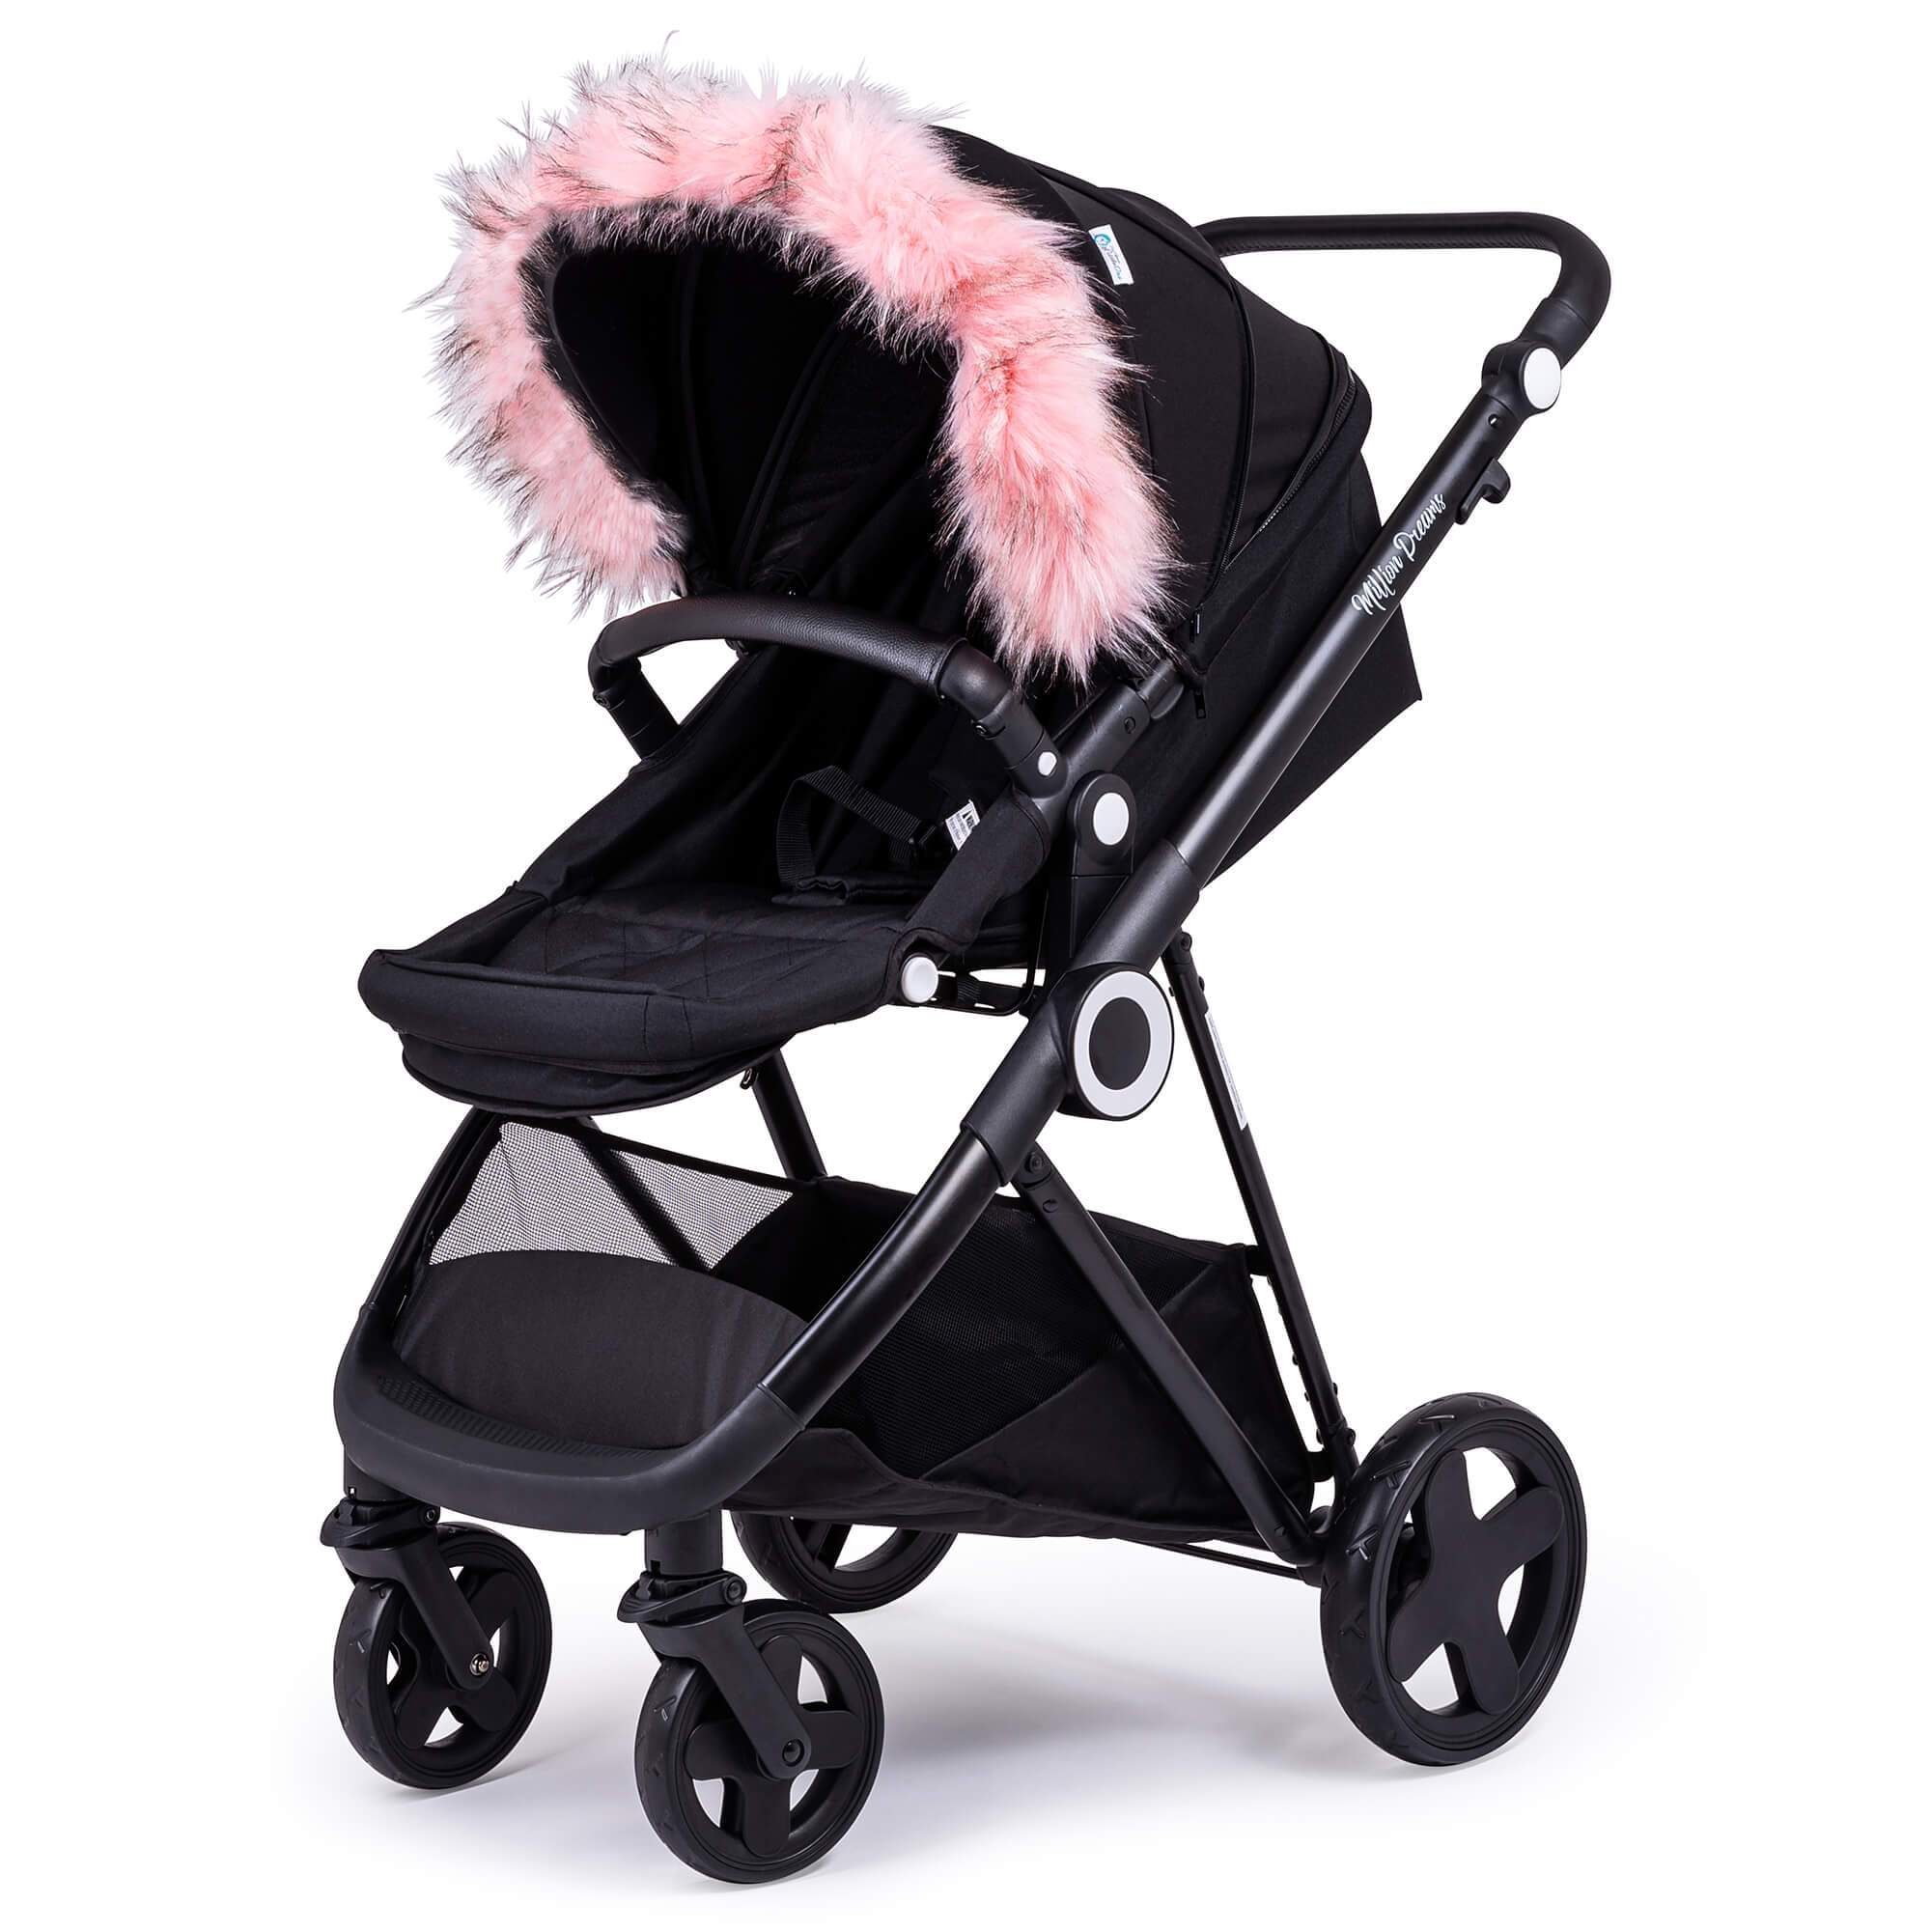 Pram Fur Hood Trim Attachment for Pushchair Compatible with Joie - Light Pink / Fits All Models | For Your Little One